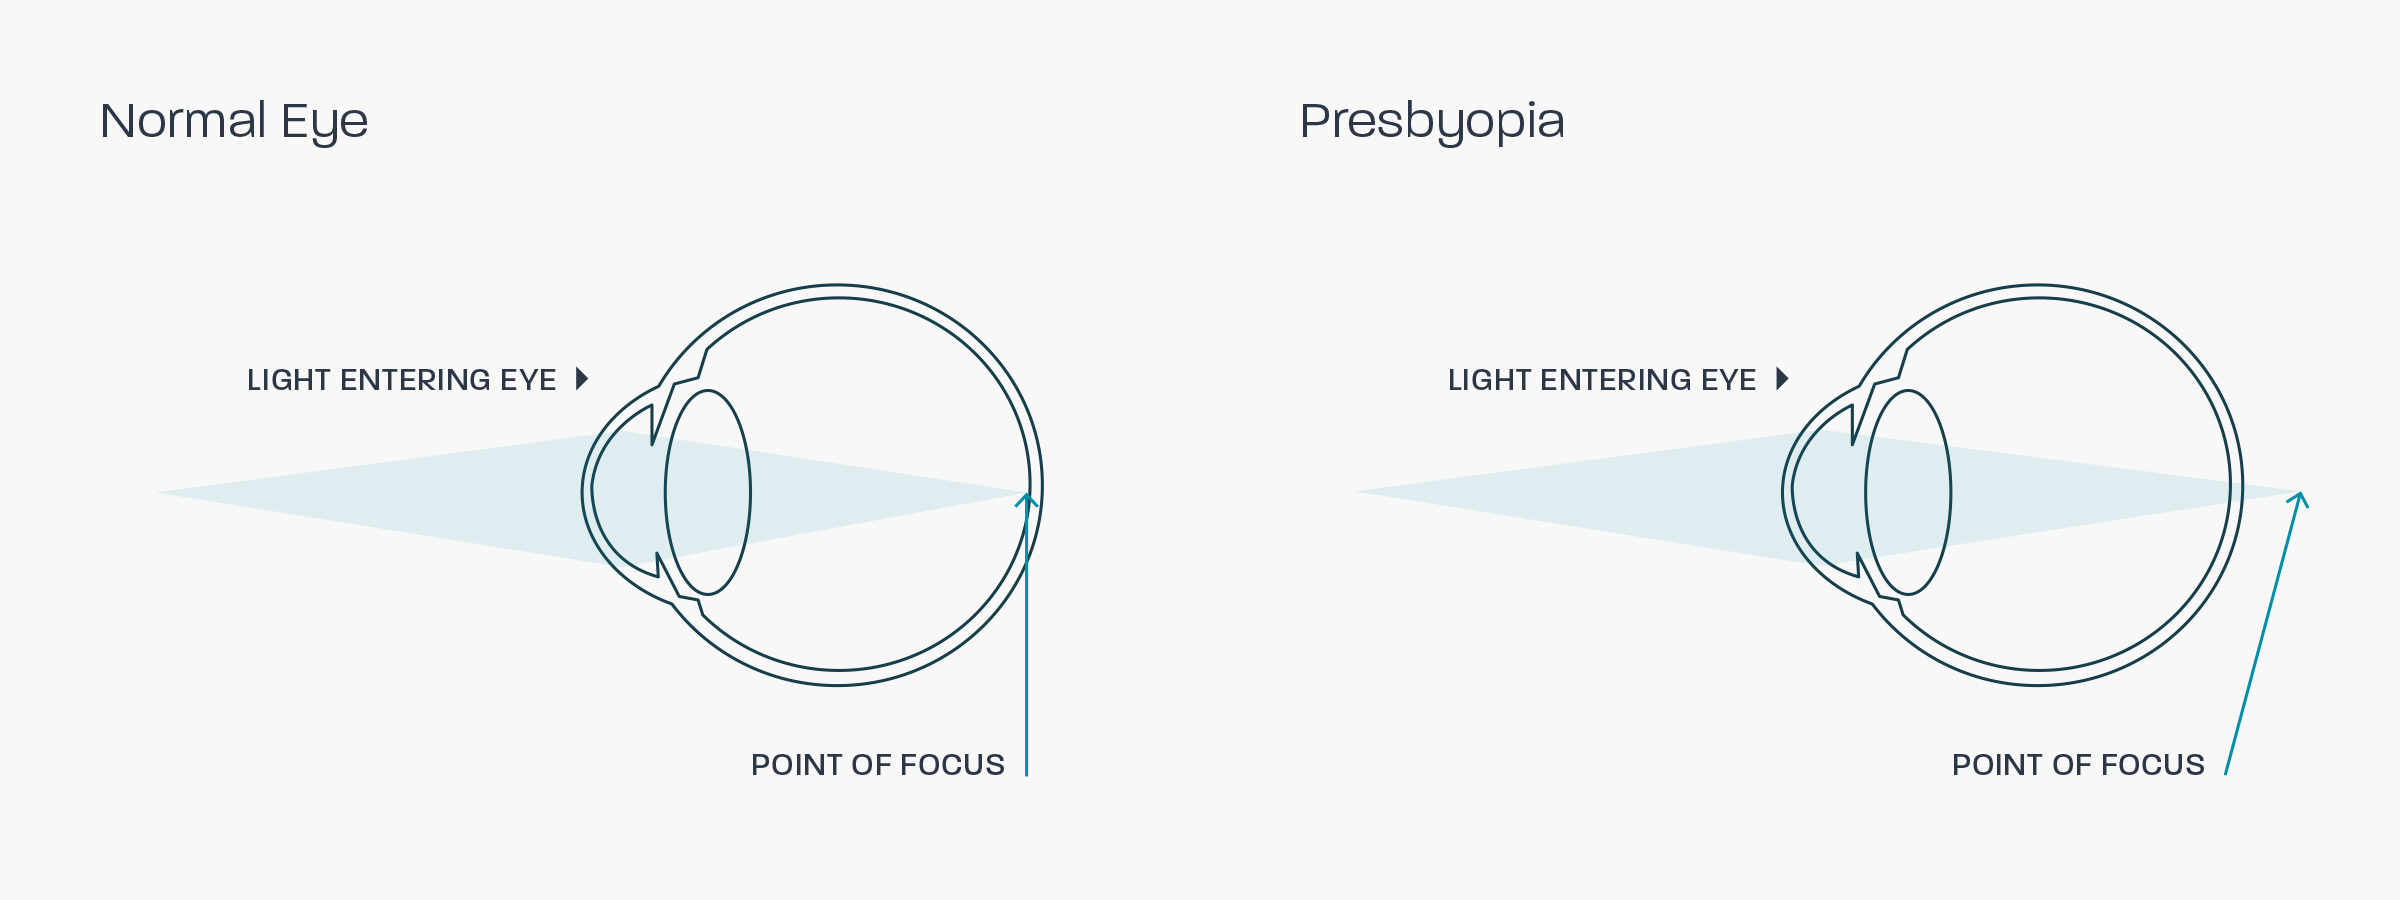 A graphic showing how presbyopia affects the eye